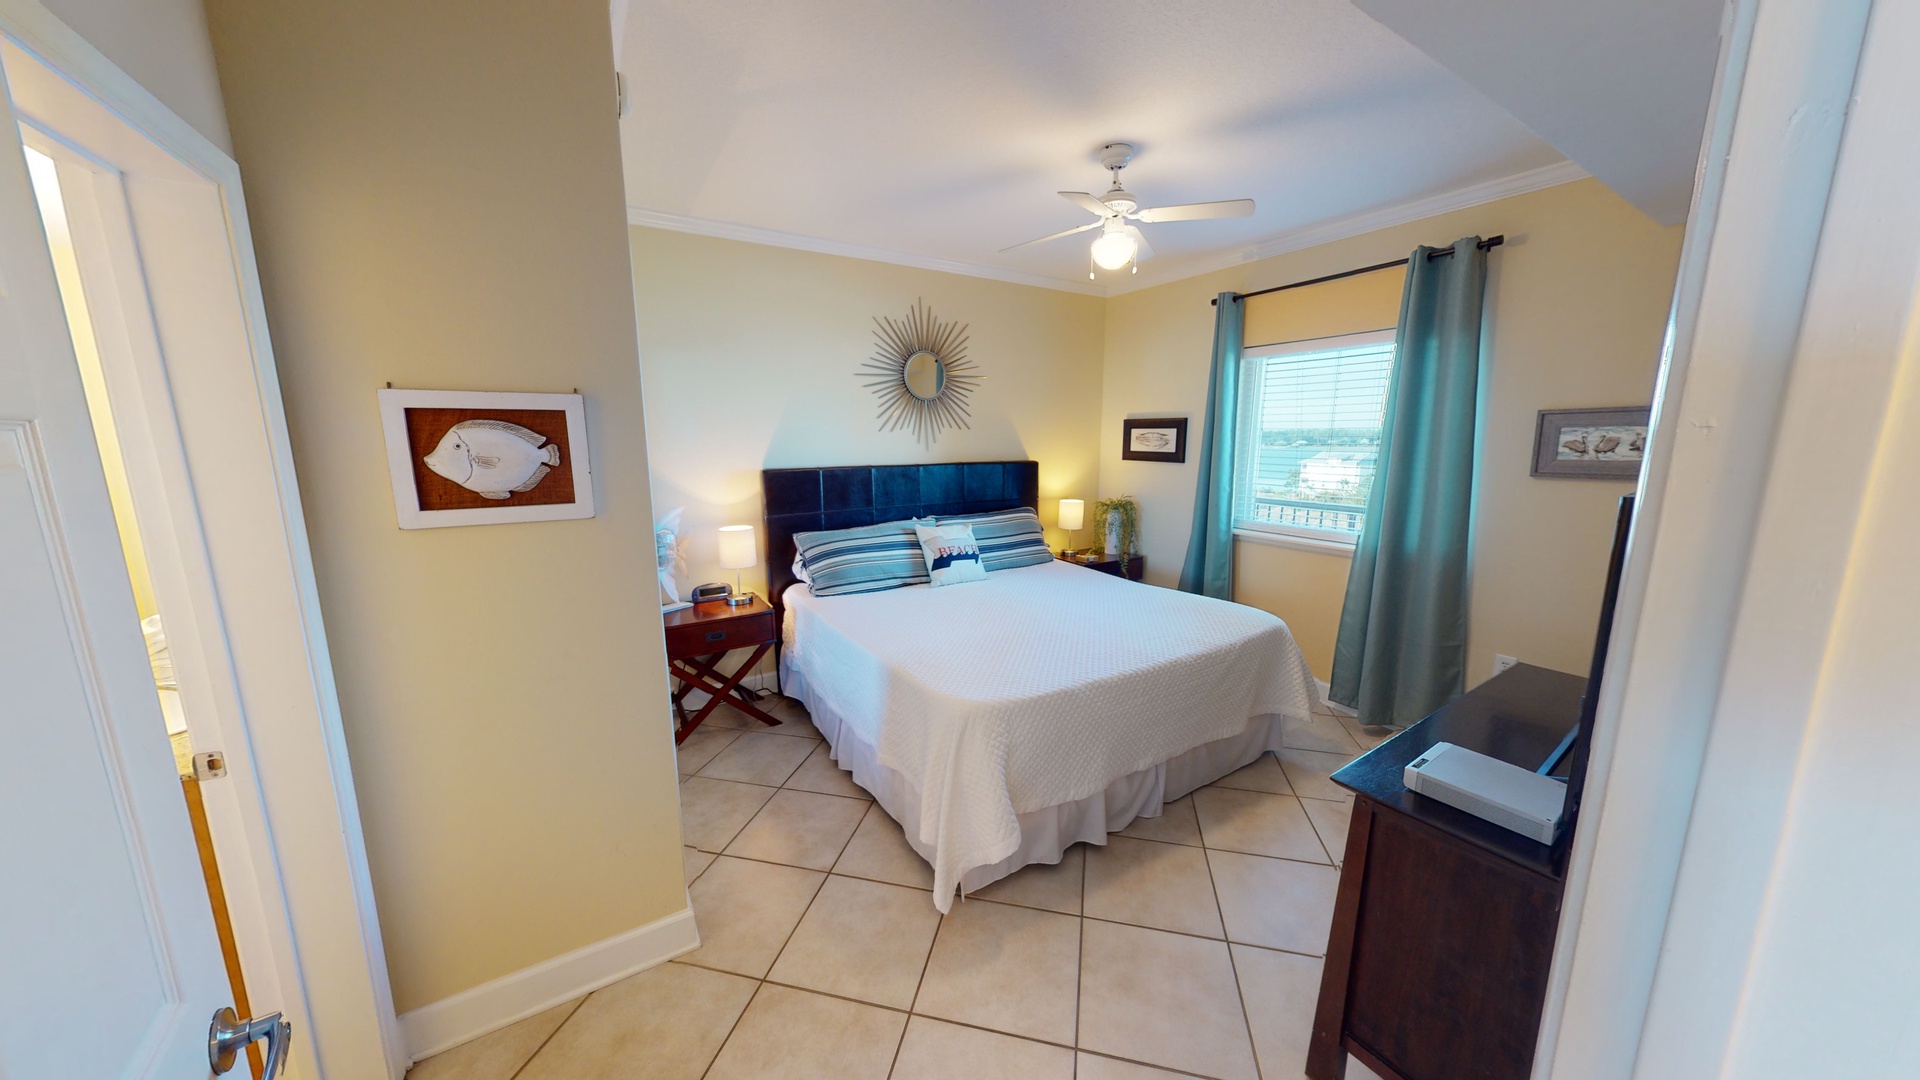 The master bedroom features a king bed, TV and a private bathroom